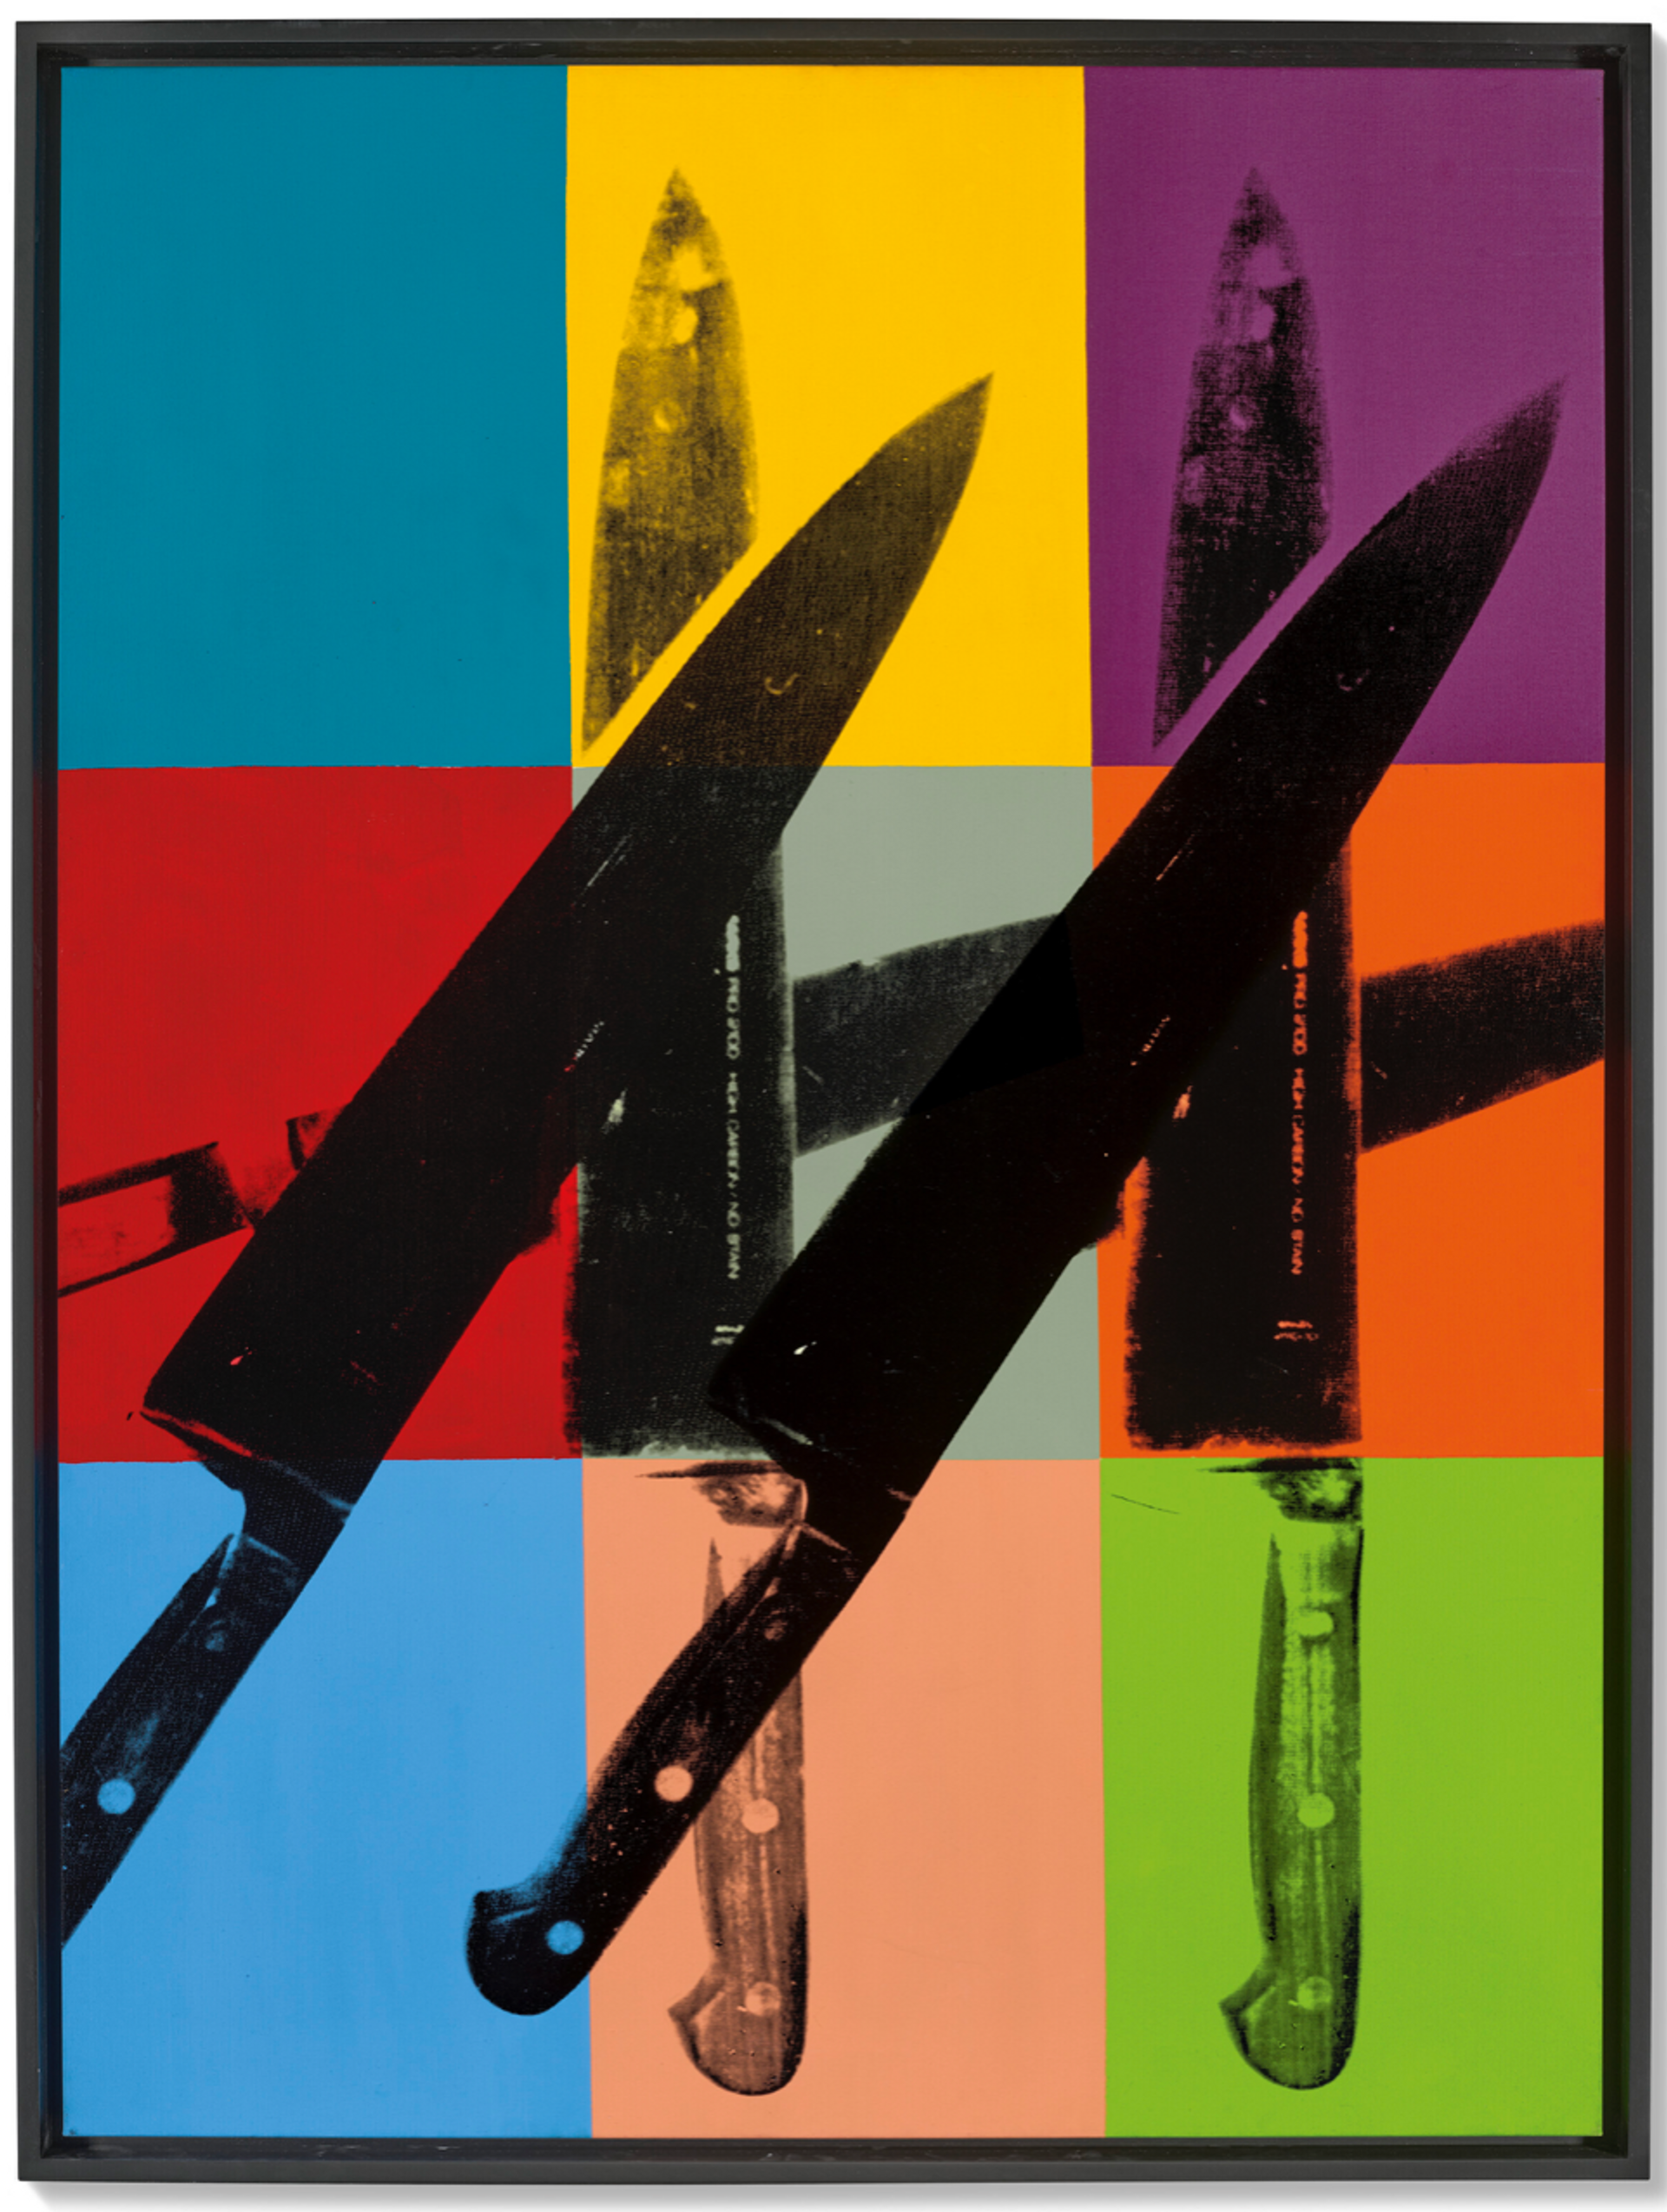 A screenprint by Andy Warhol in bold block colours depicting six knives against a checkerboard background.